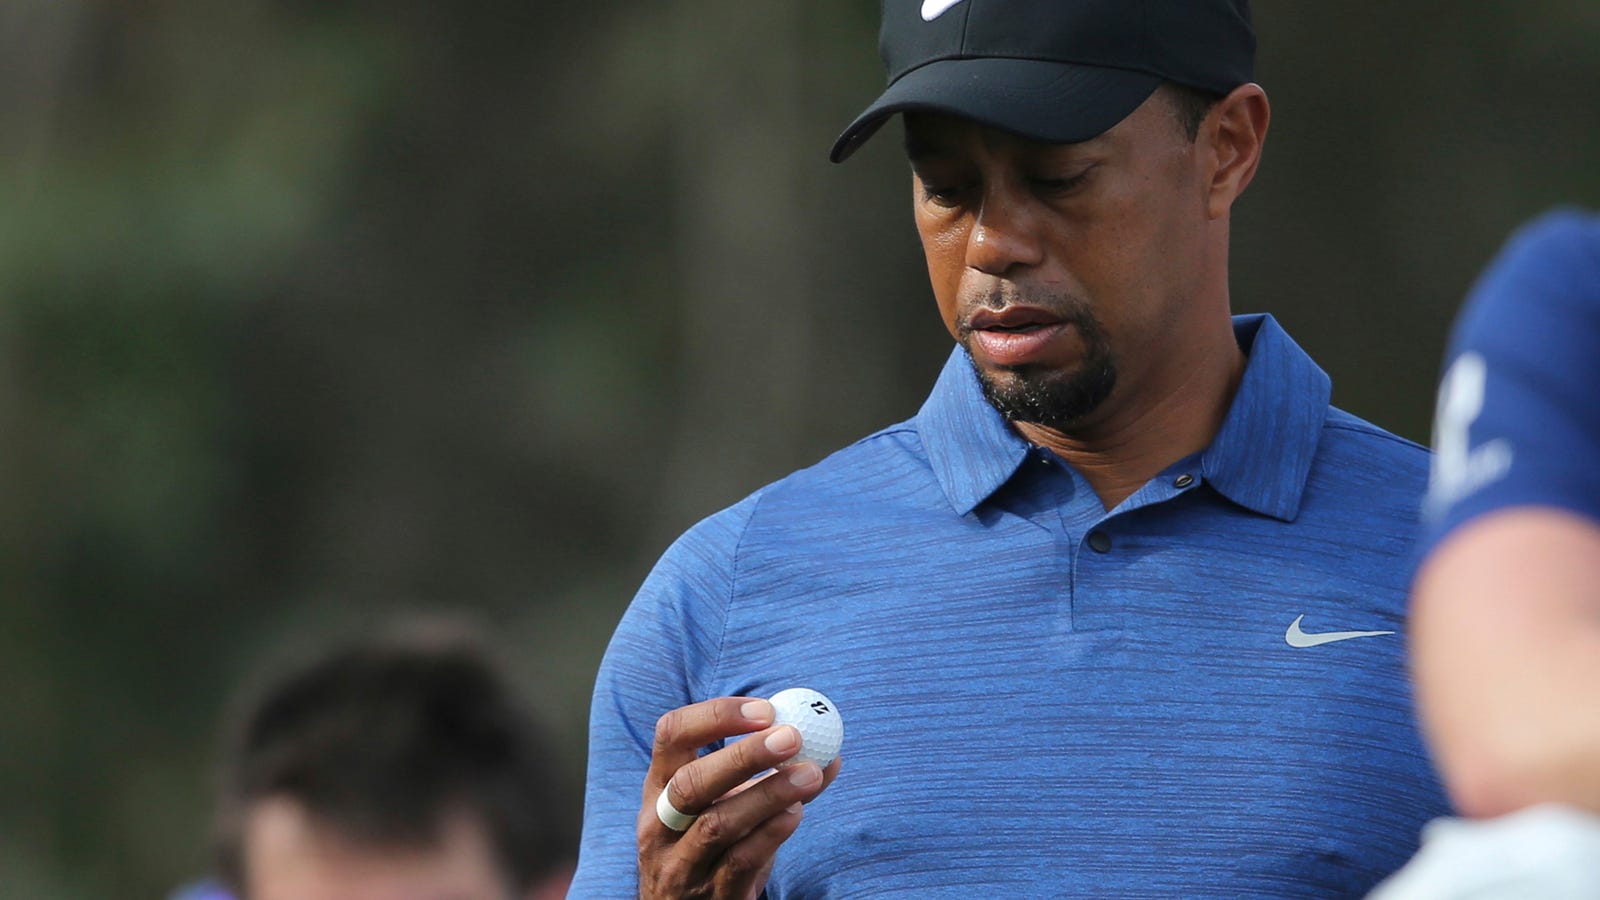 Report: Tiger Woods Headed Back to Rehab - The Root